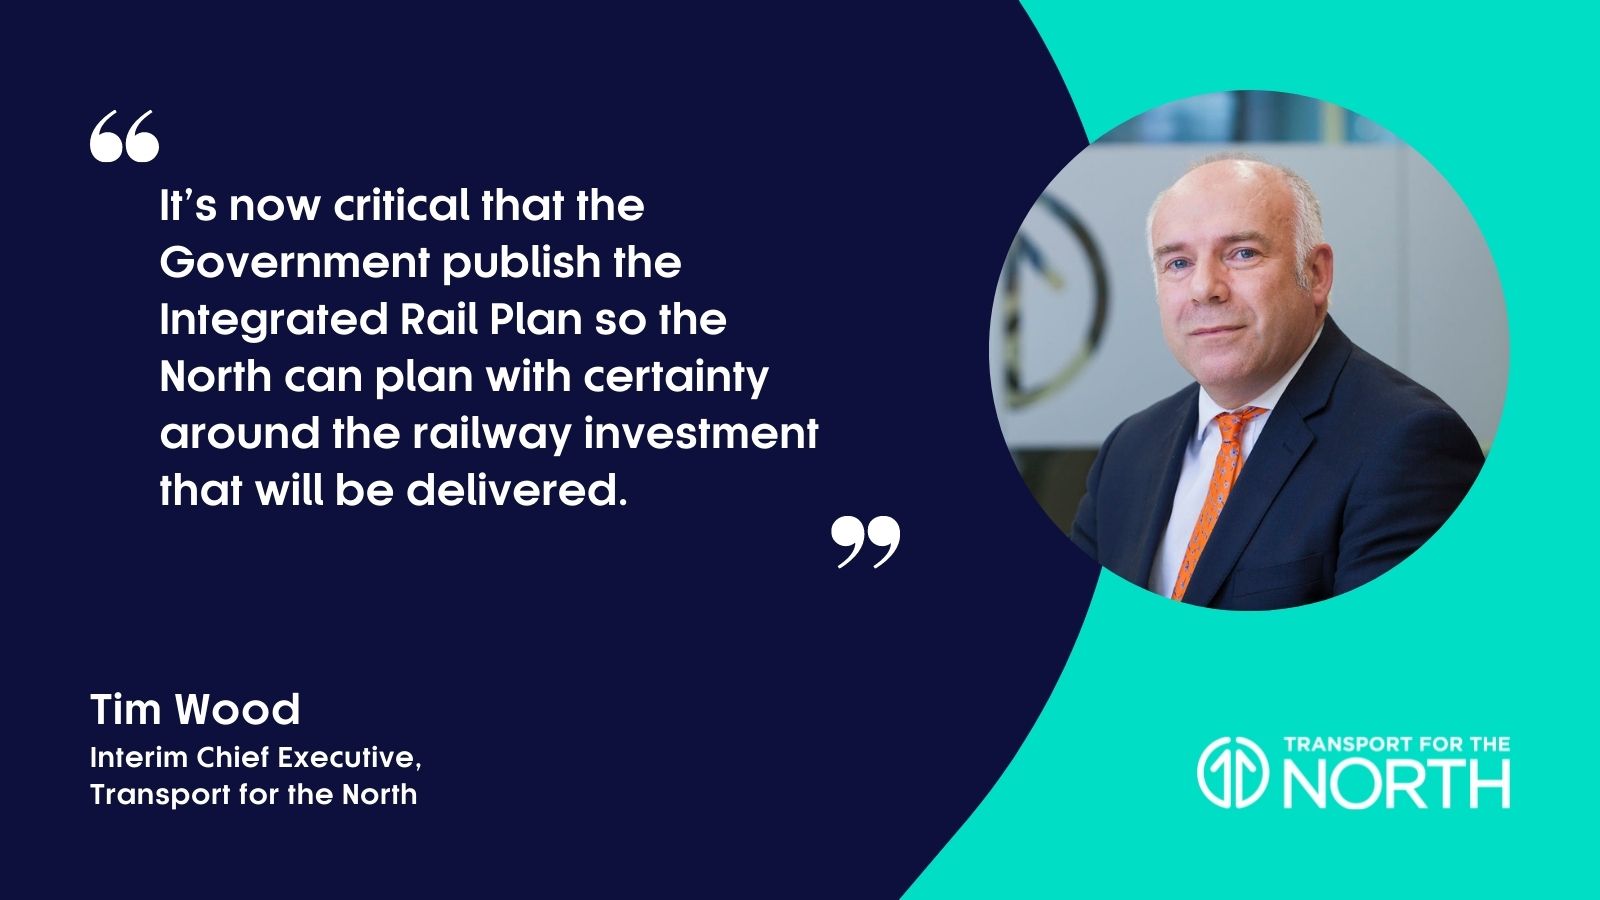 Tim Wood, Interim Chief Executive at Transport for the North on the Integrated Rail Plan